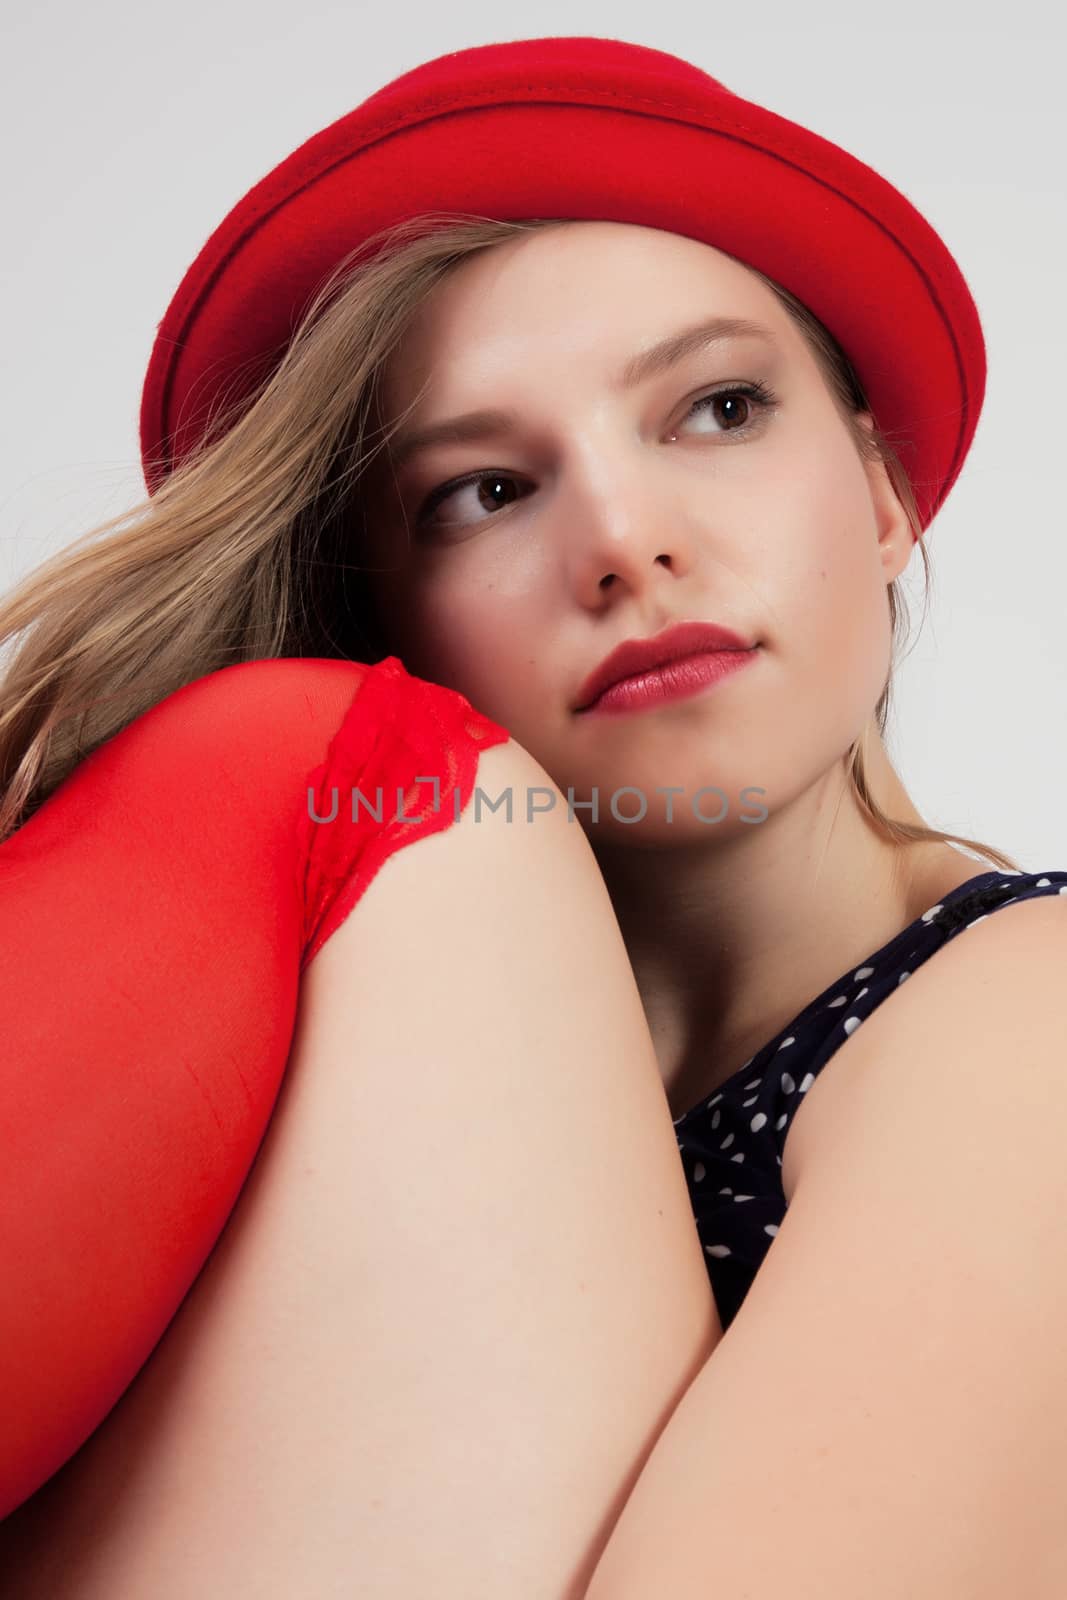 Young lady in red hat sitting with bent leg,